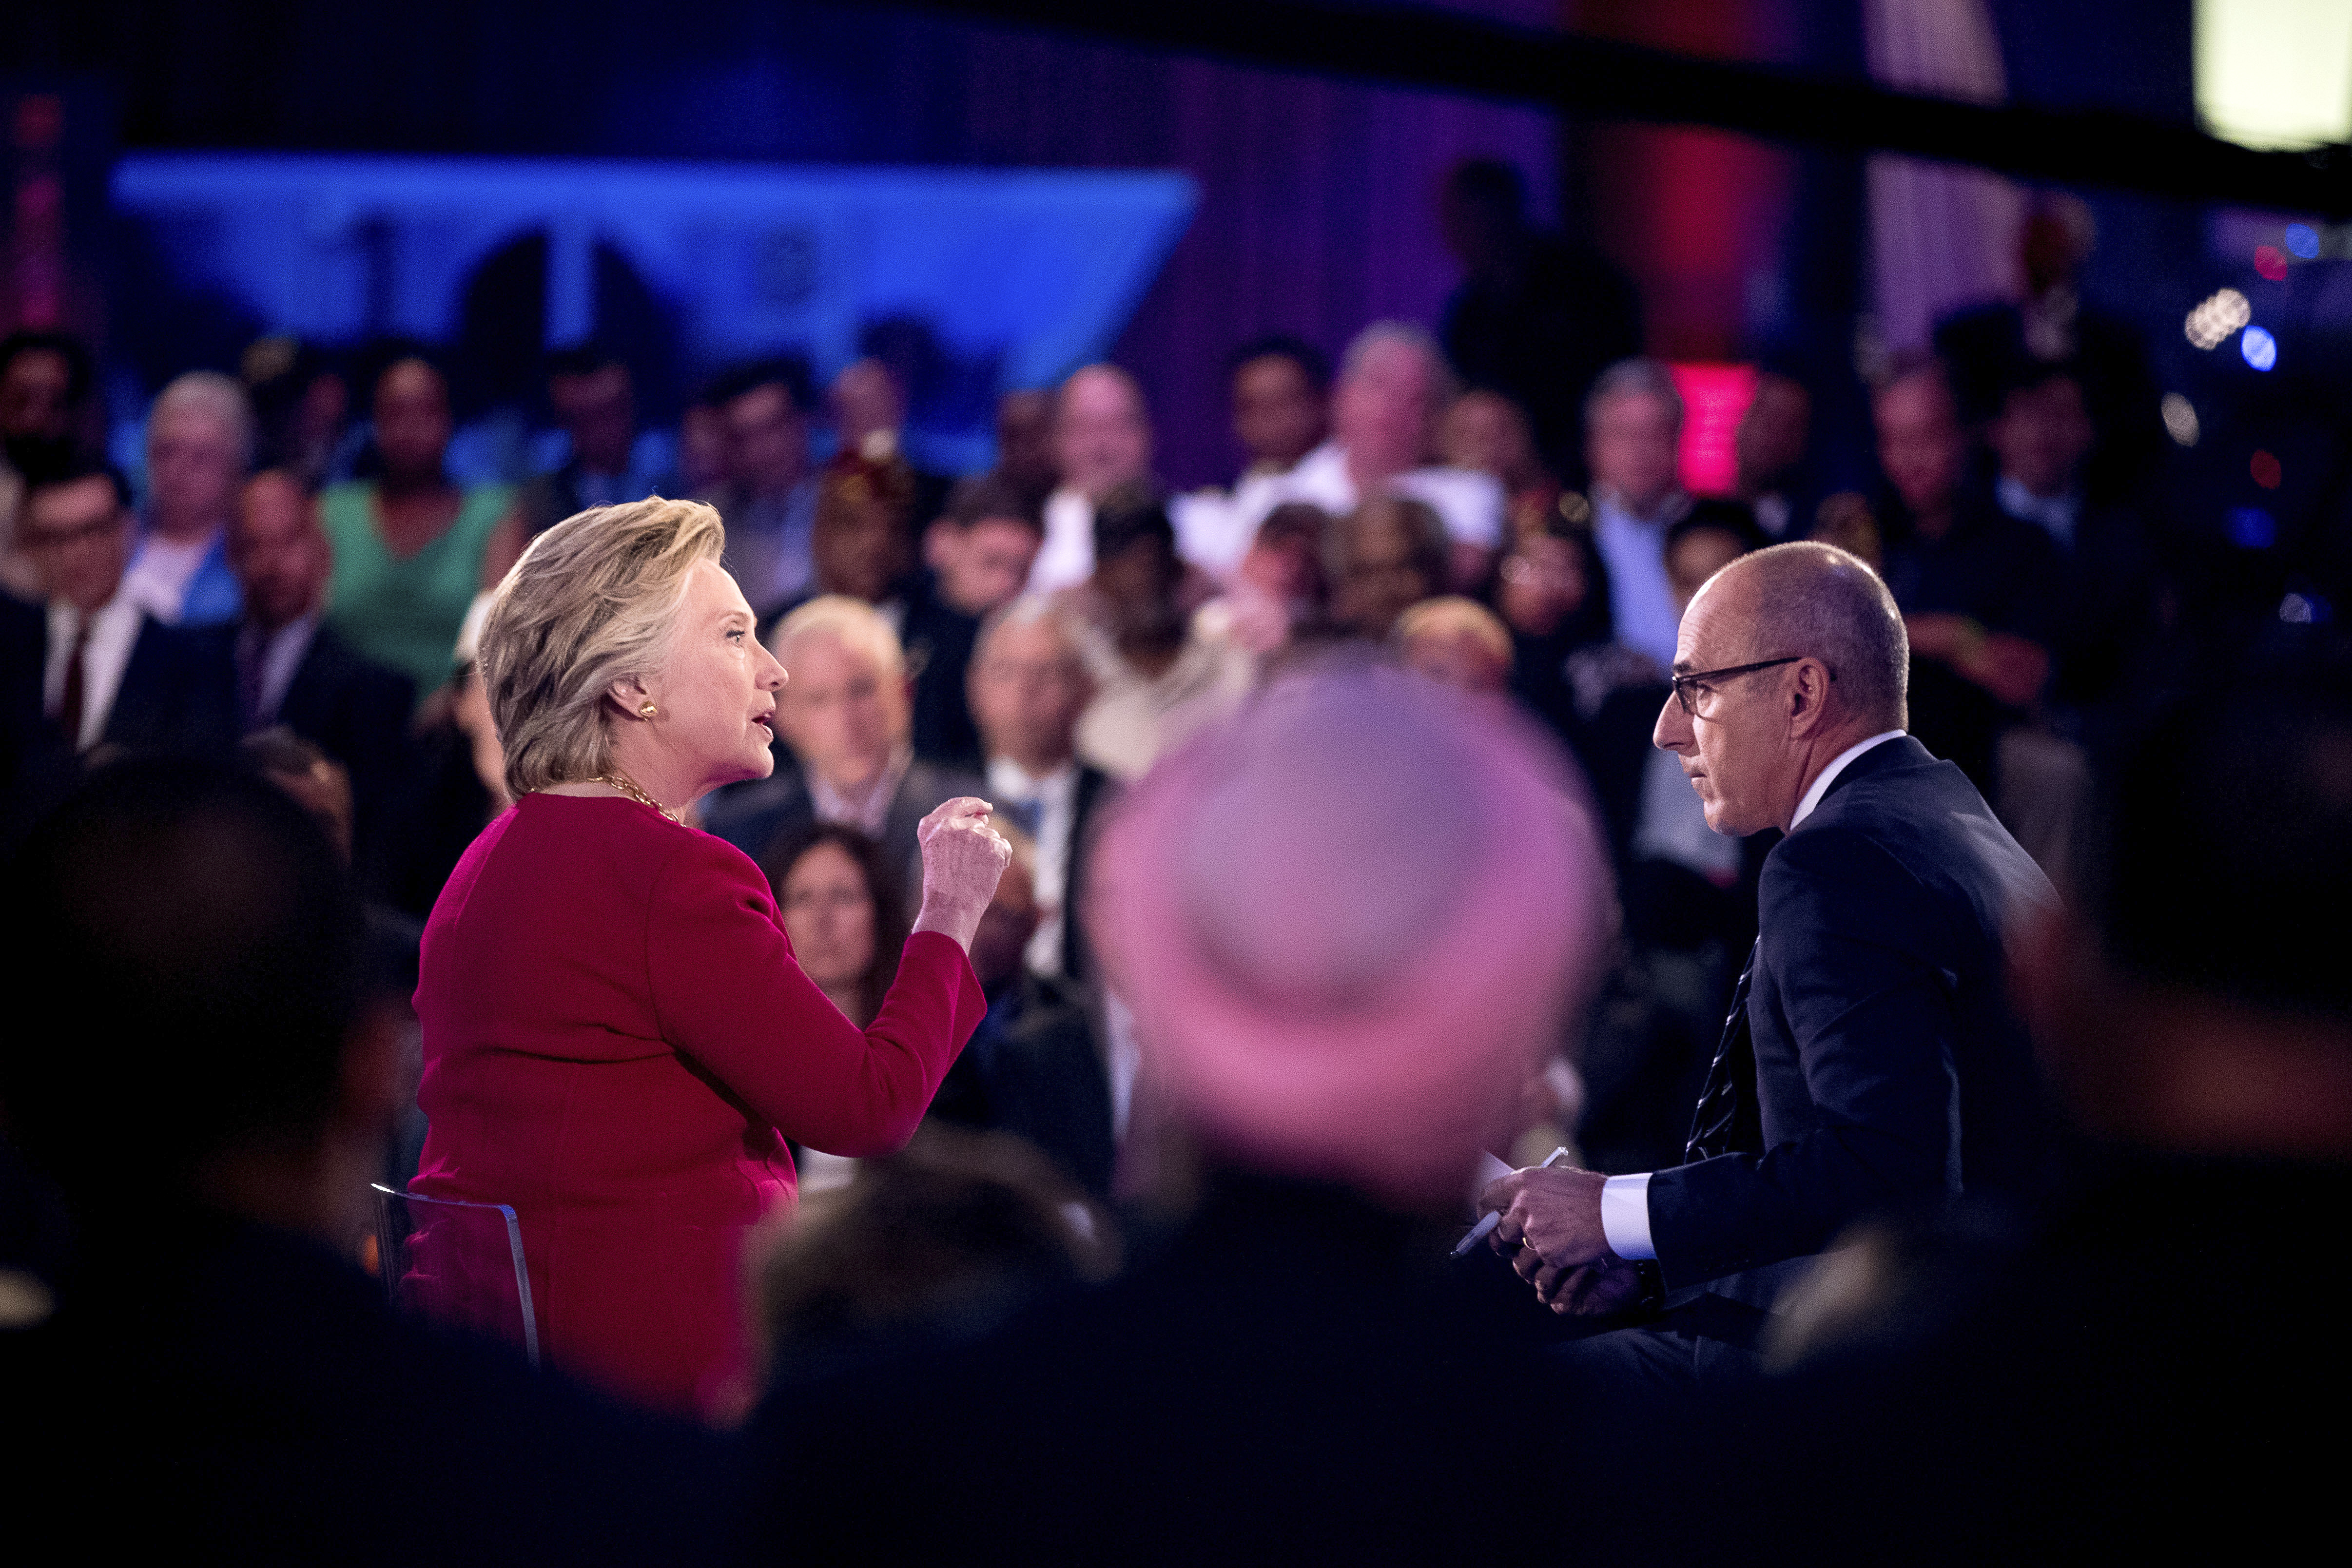 Lauer lies low after drawing flak for riding Clinton on